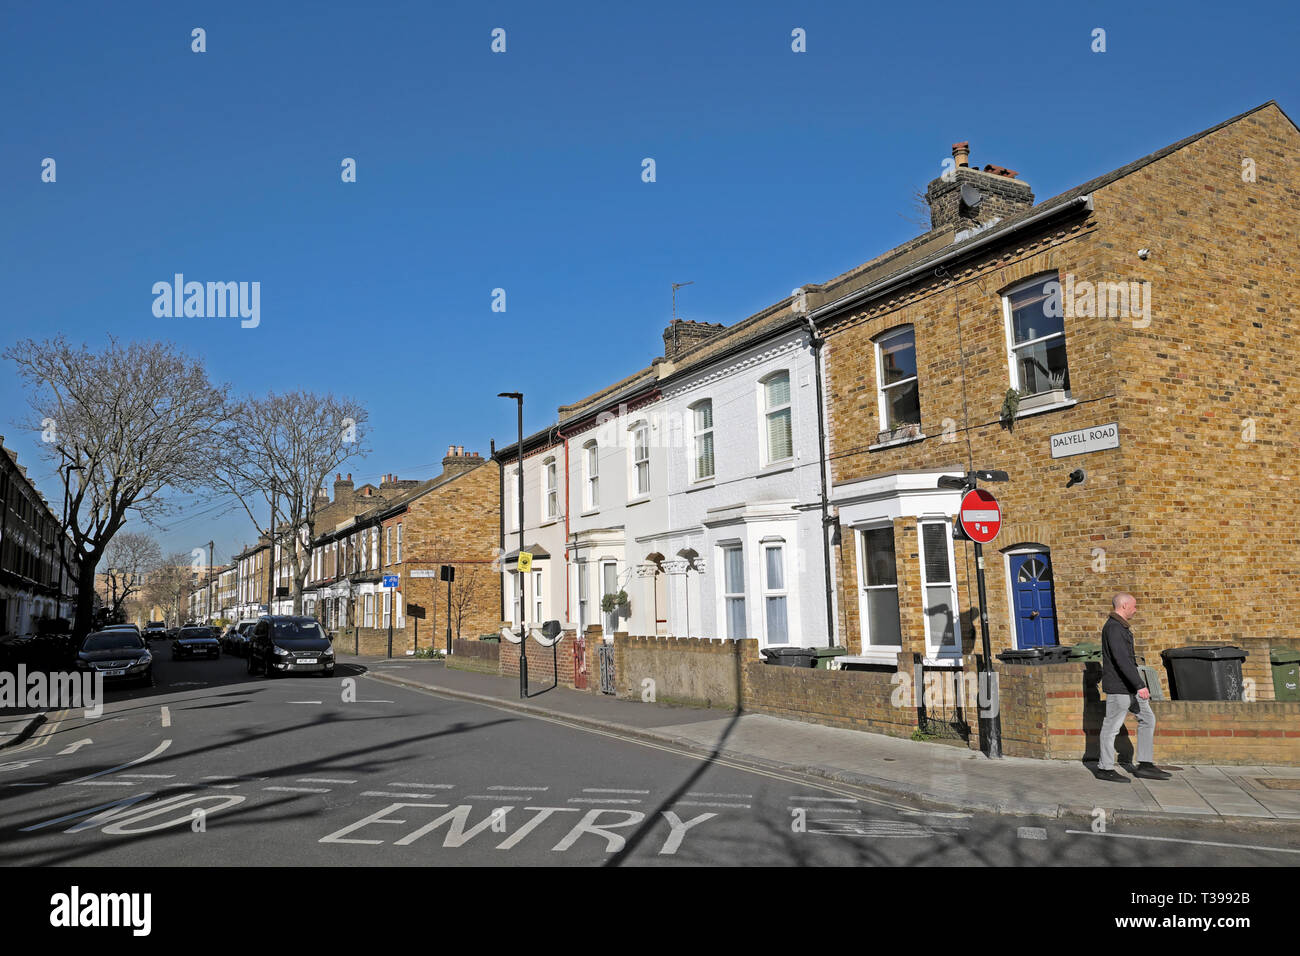 View of man walking and row of terraced housing on the corner of Dalyell Road and Pulross Rd in Brixton, South London England UK  KATHY DEWITT Stock Photo